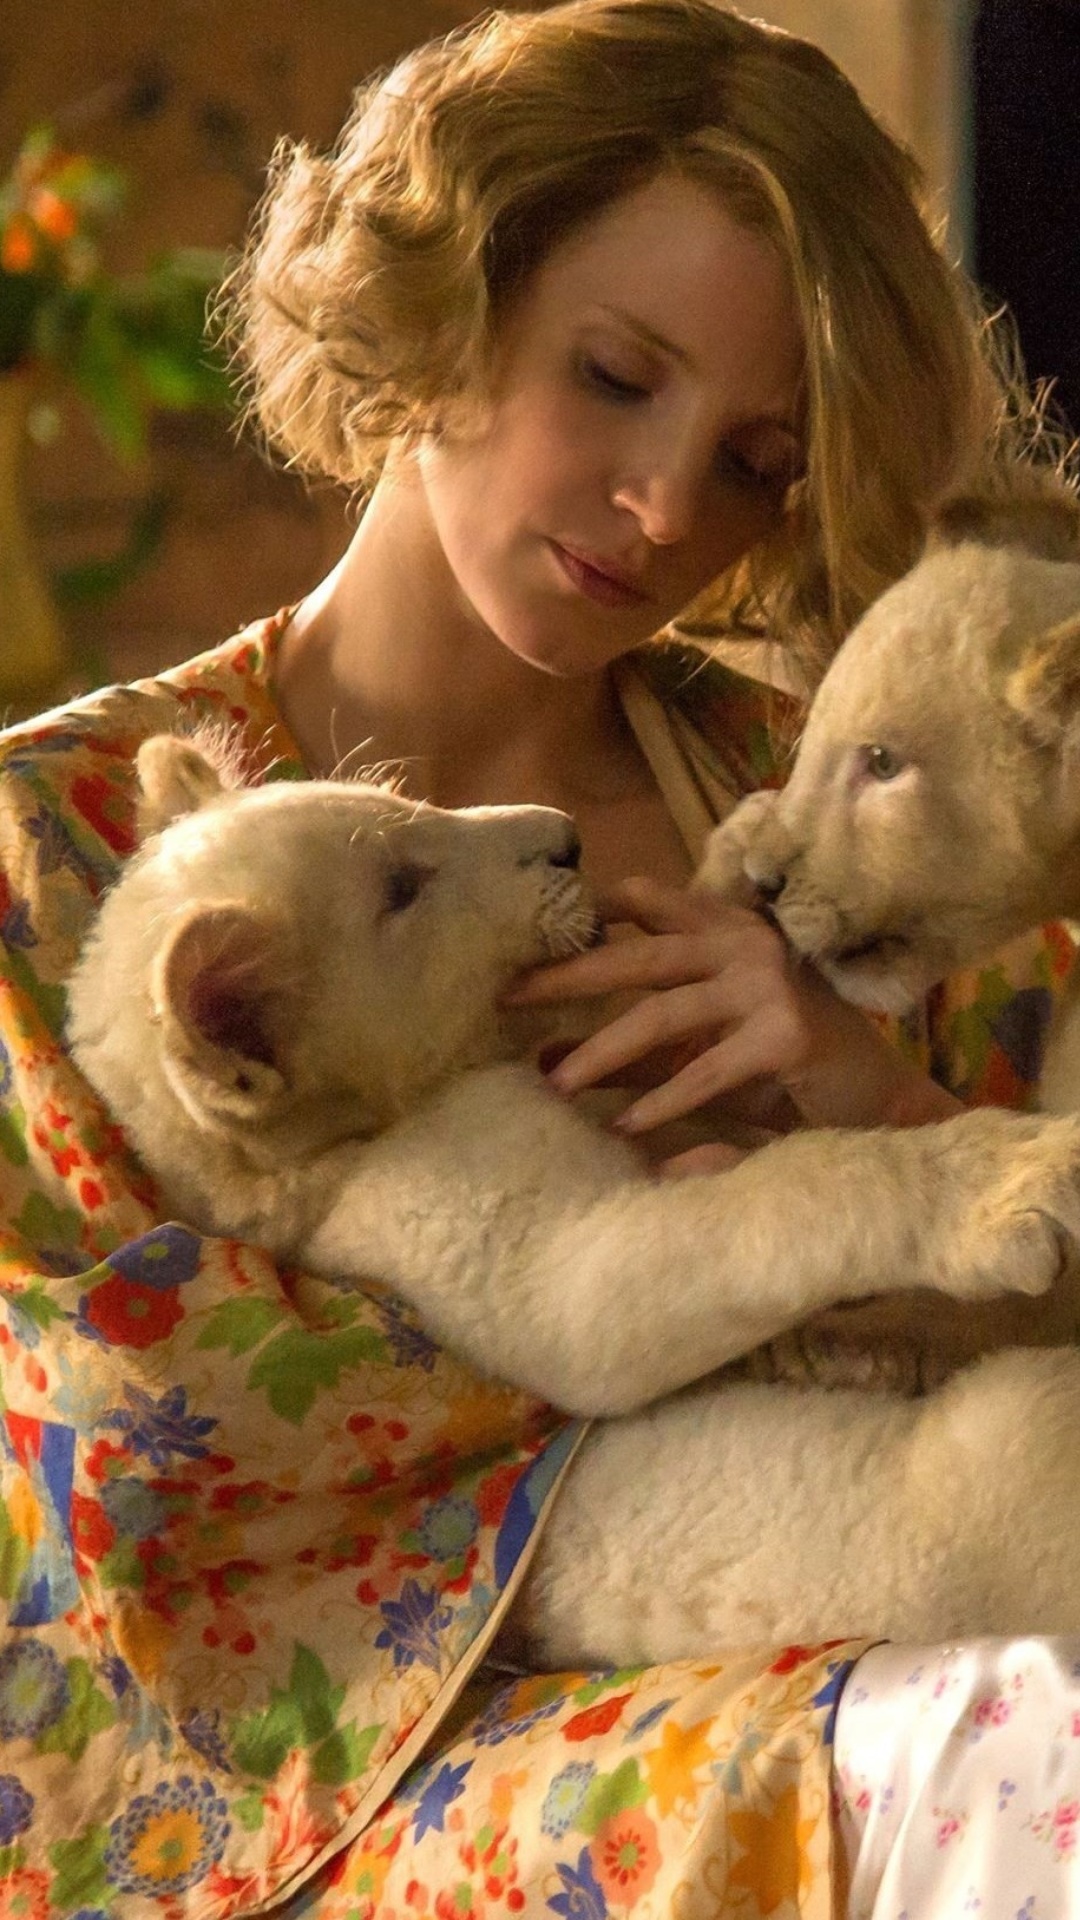 Das The Zookeepers Wife Film with Jessica Chastain Wallpaper 1080x1920